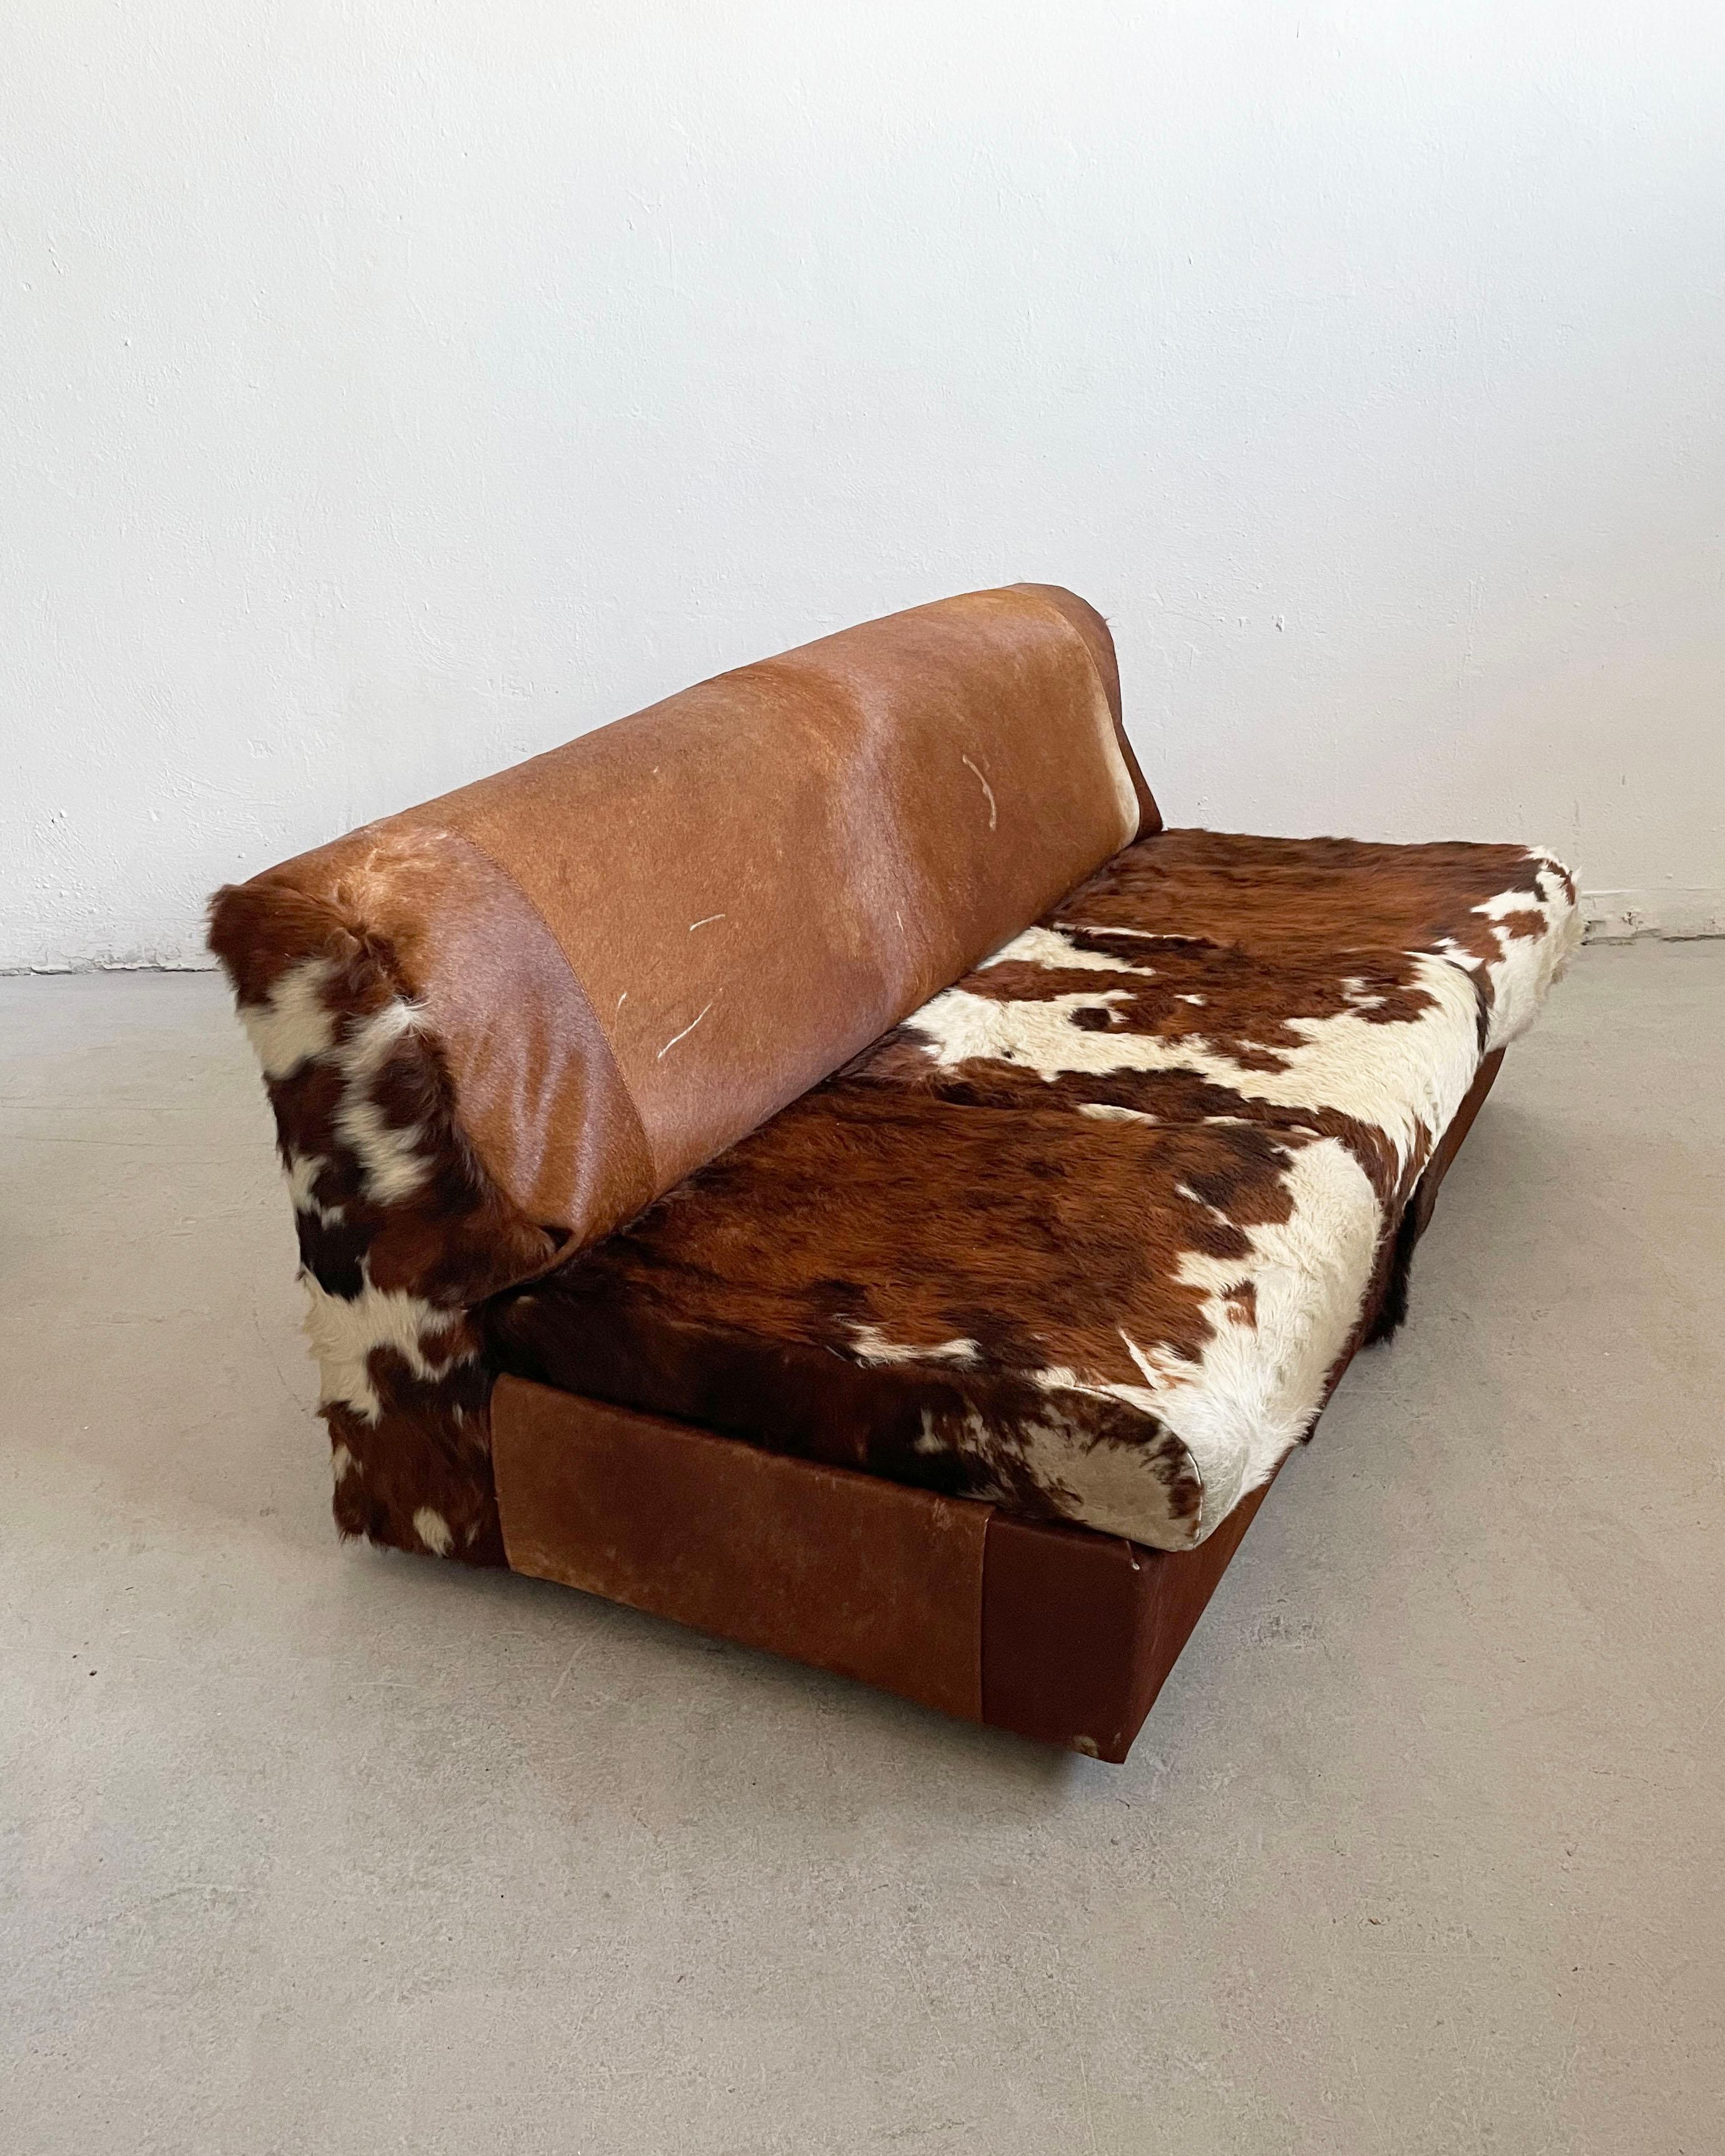 Genuine vintage lounge seating set upholstered in cowhide fur from the 1970's.
Beautiful 1970's design reminiscent of Jacques Charpentier design.

The set consists of a sofa and two chairs. The structure is made of solid wood and foam completely